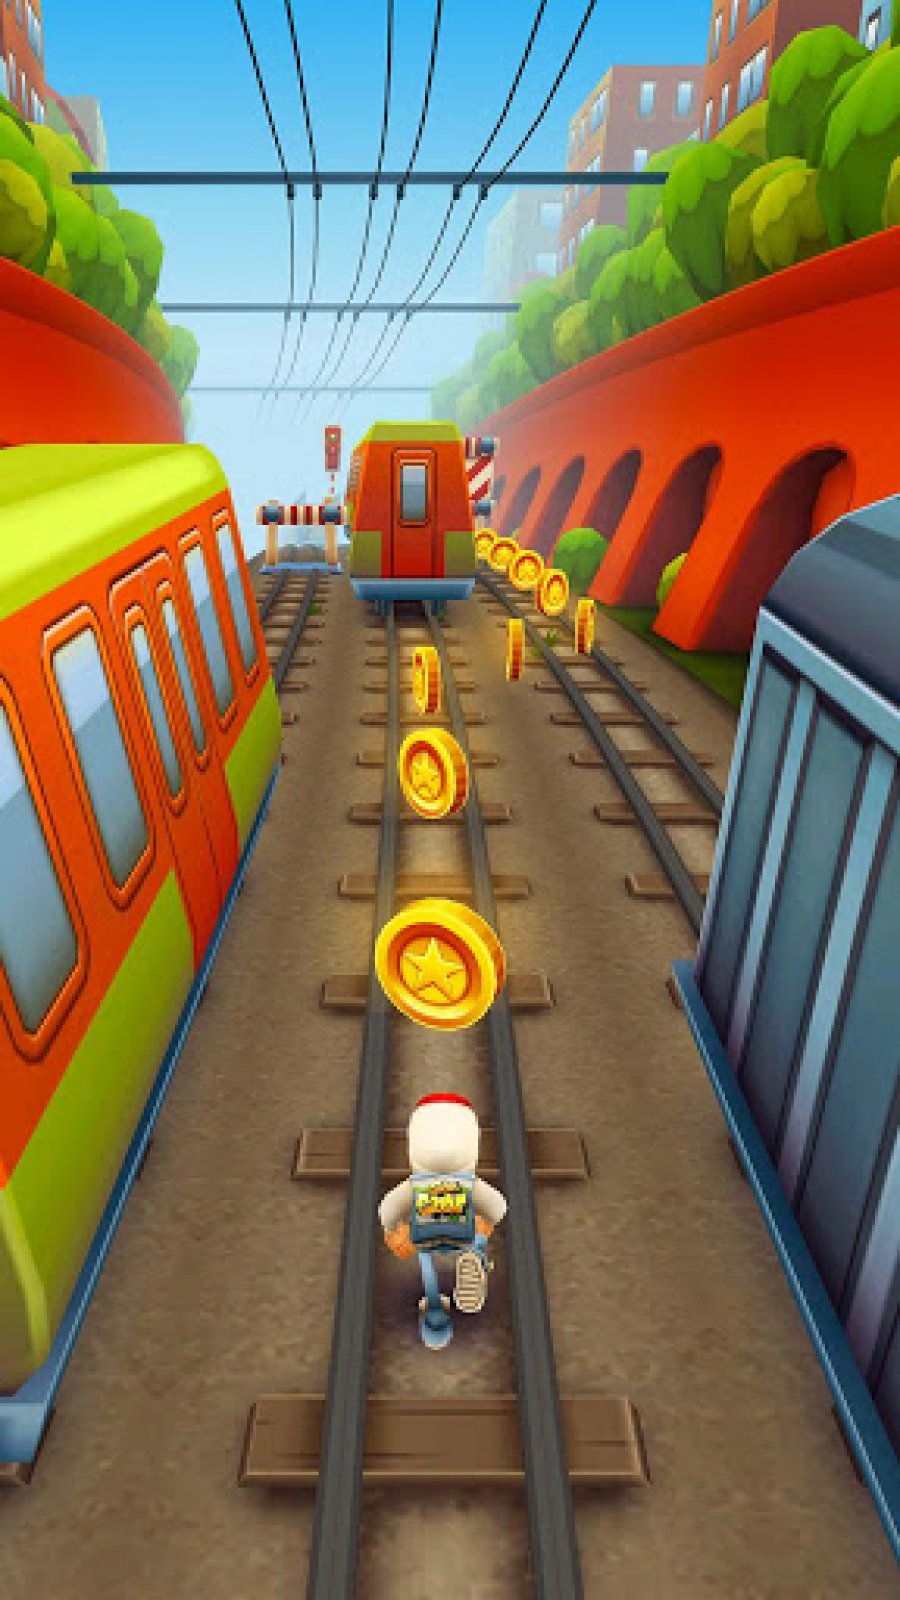 subway surfers computer game free download